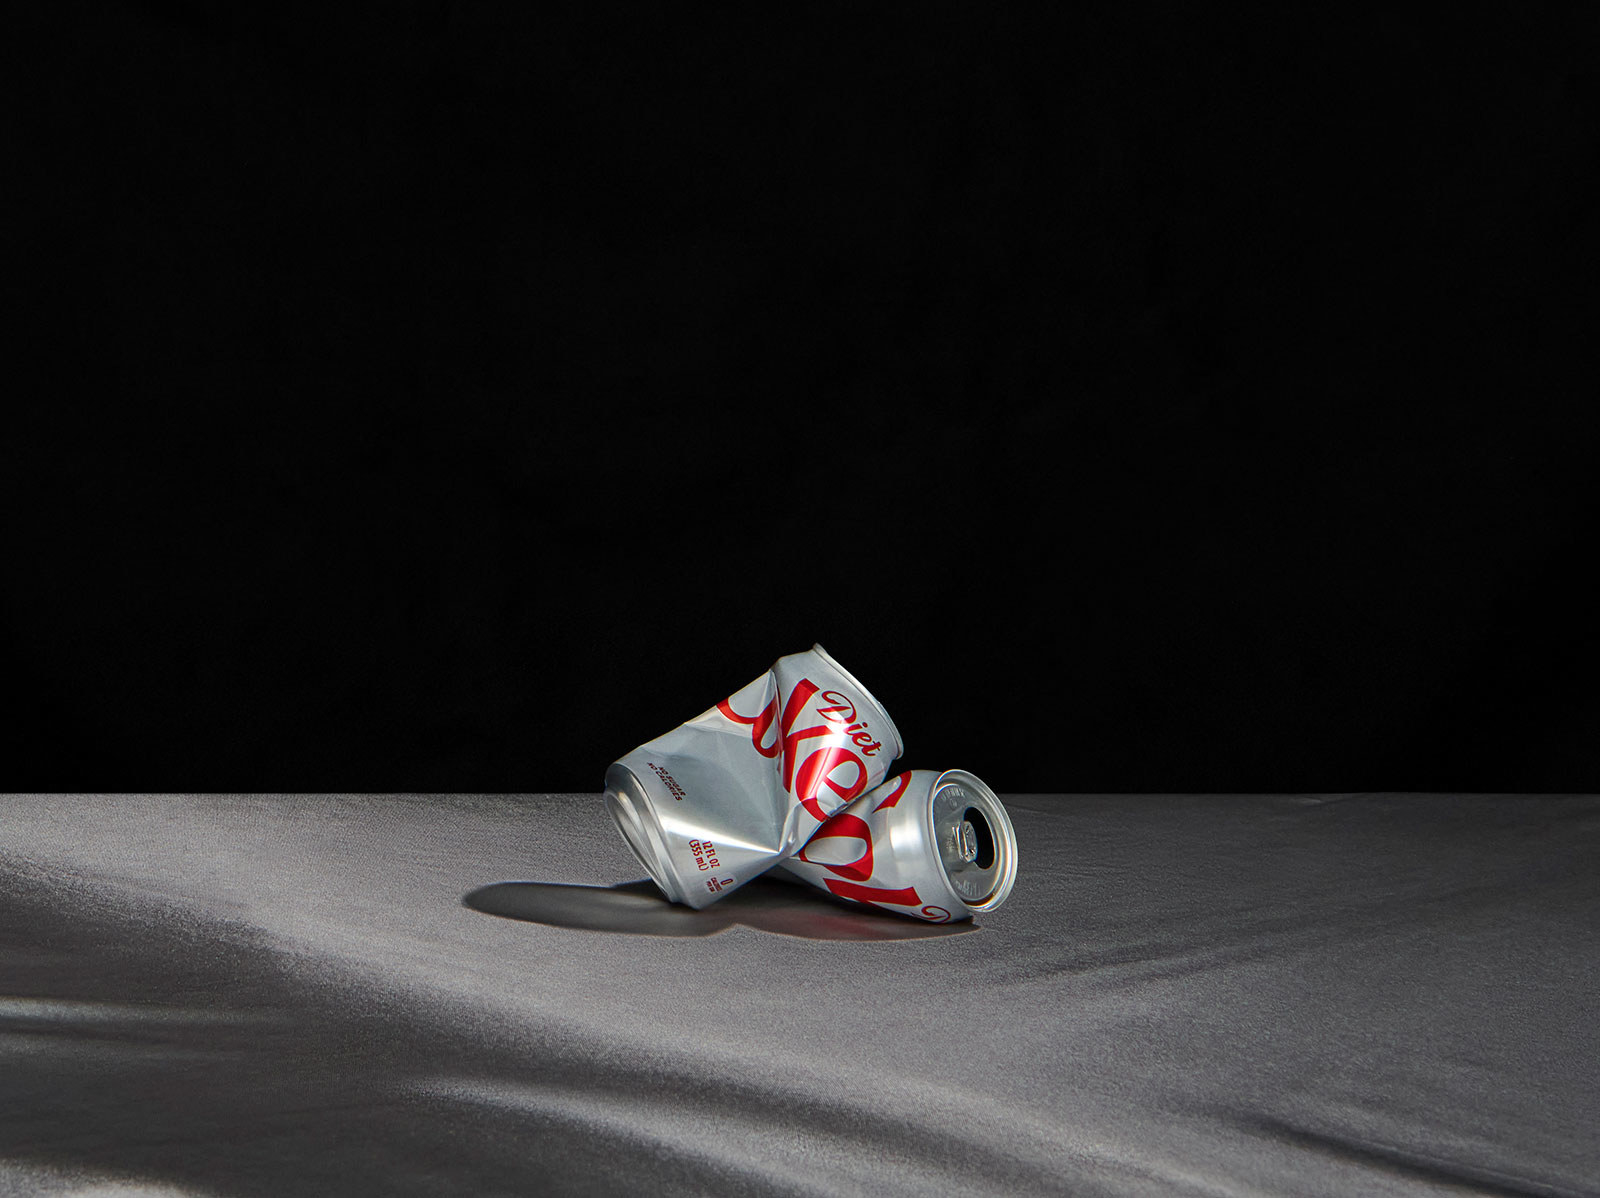 Two crumpled Diet Coke cans on top of each other on a black blanket in a dark photo studio